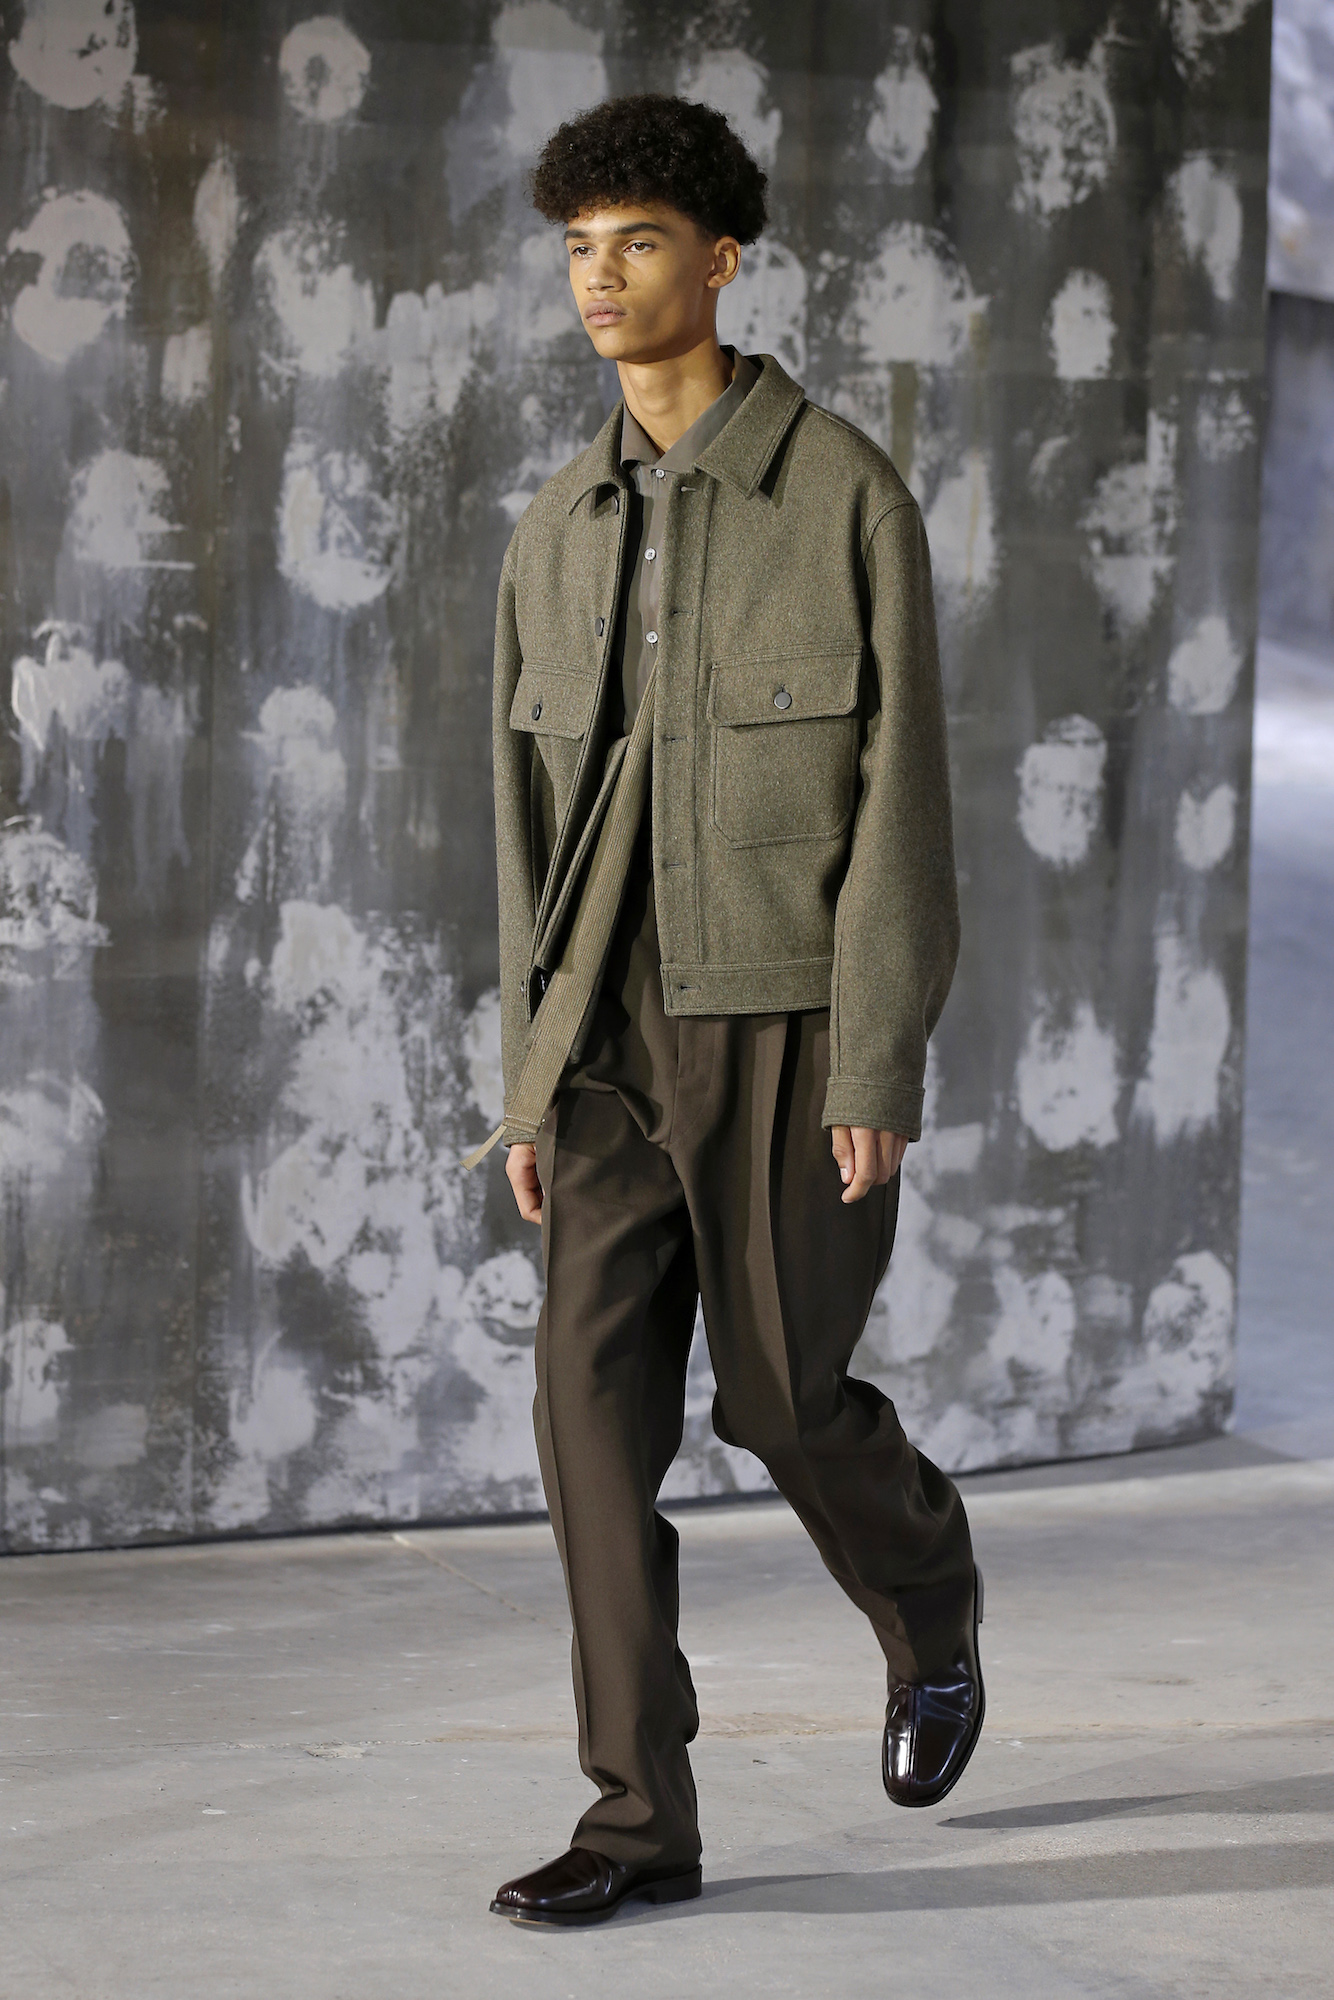 lemaire 18aw